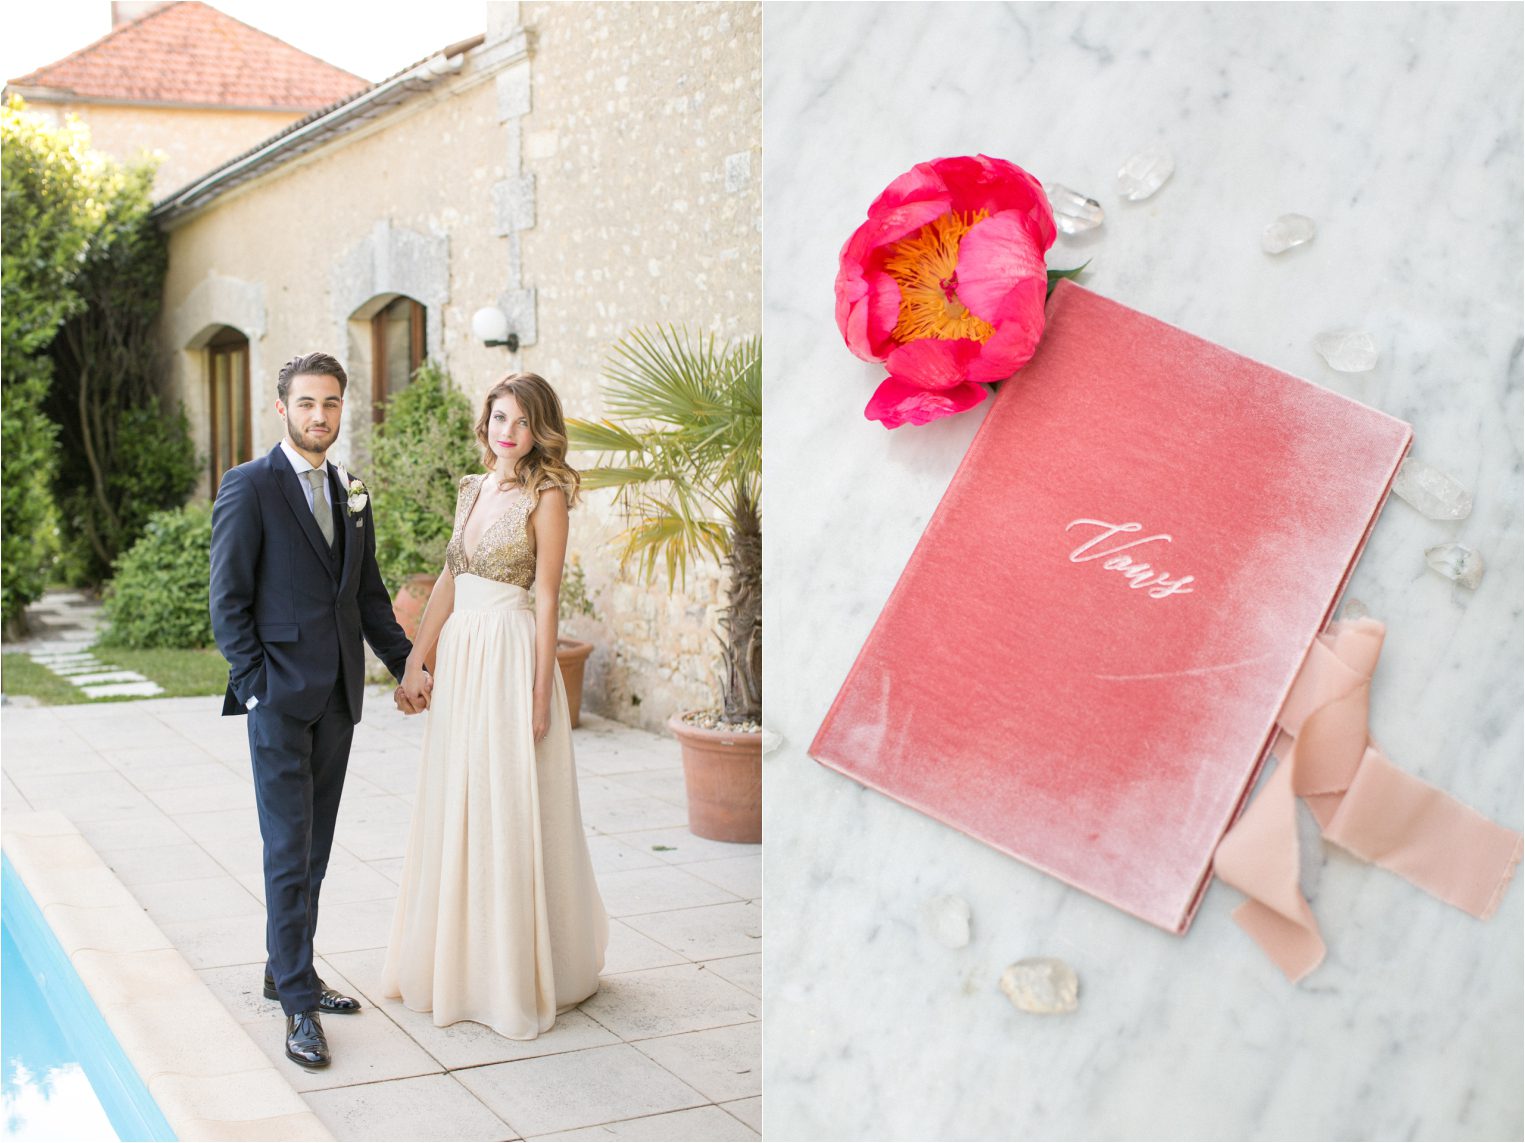 Elopement wedding inspiration for less traditional couples